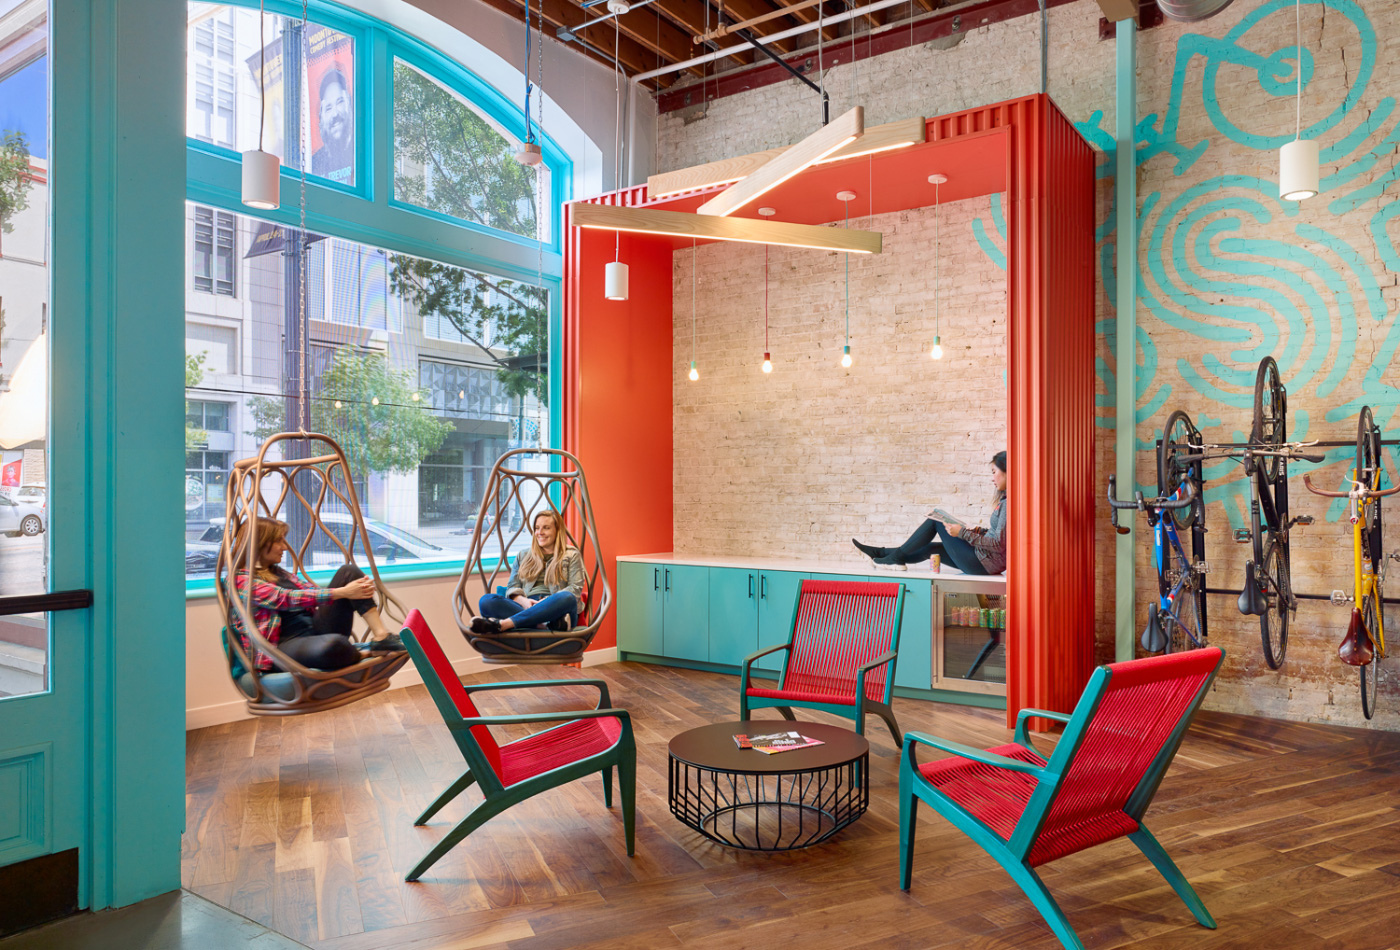 Interior of a Spreetail office, showing colorful metal accents